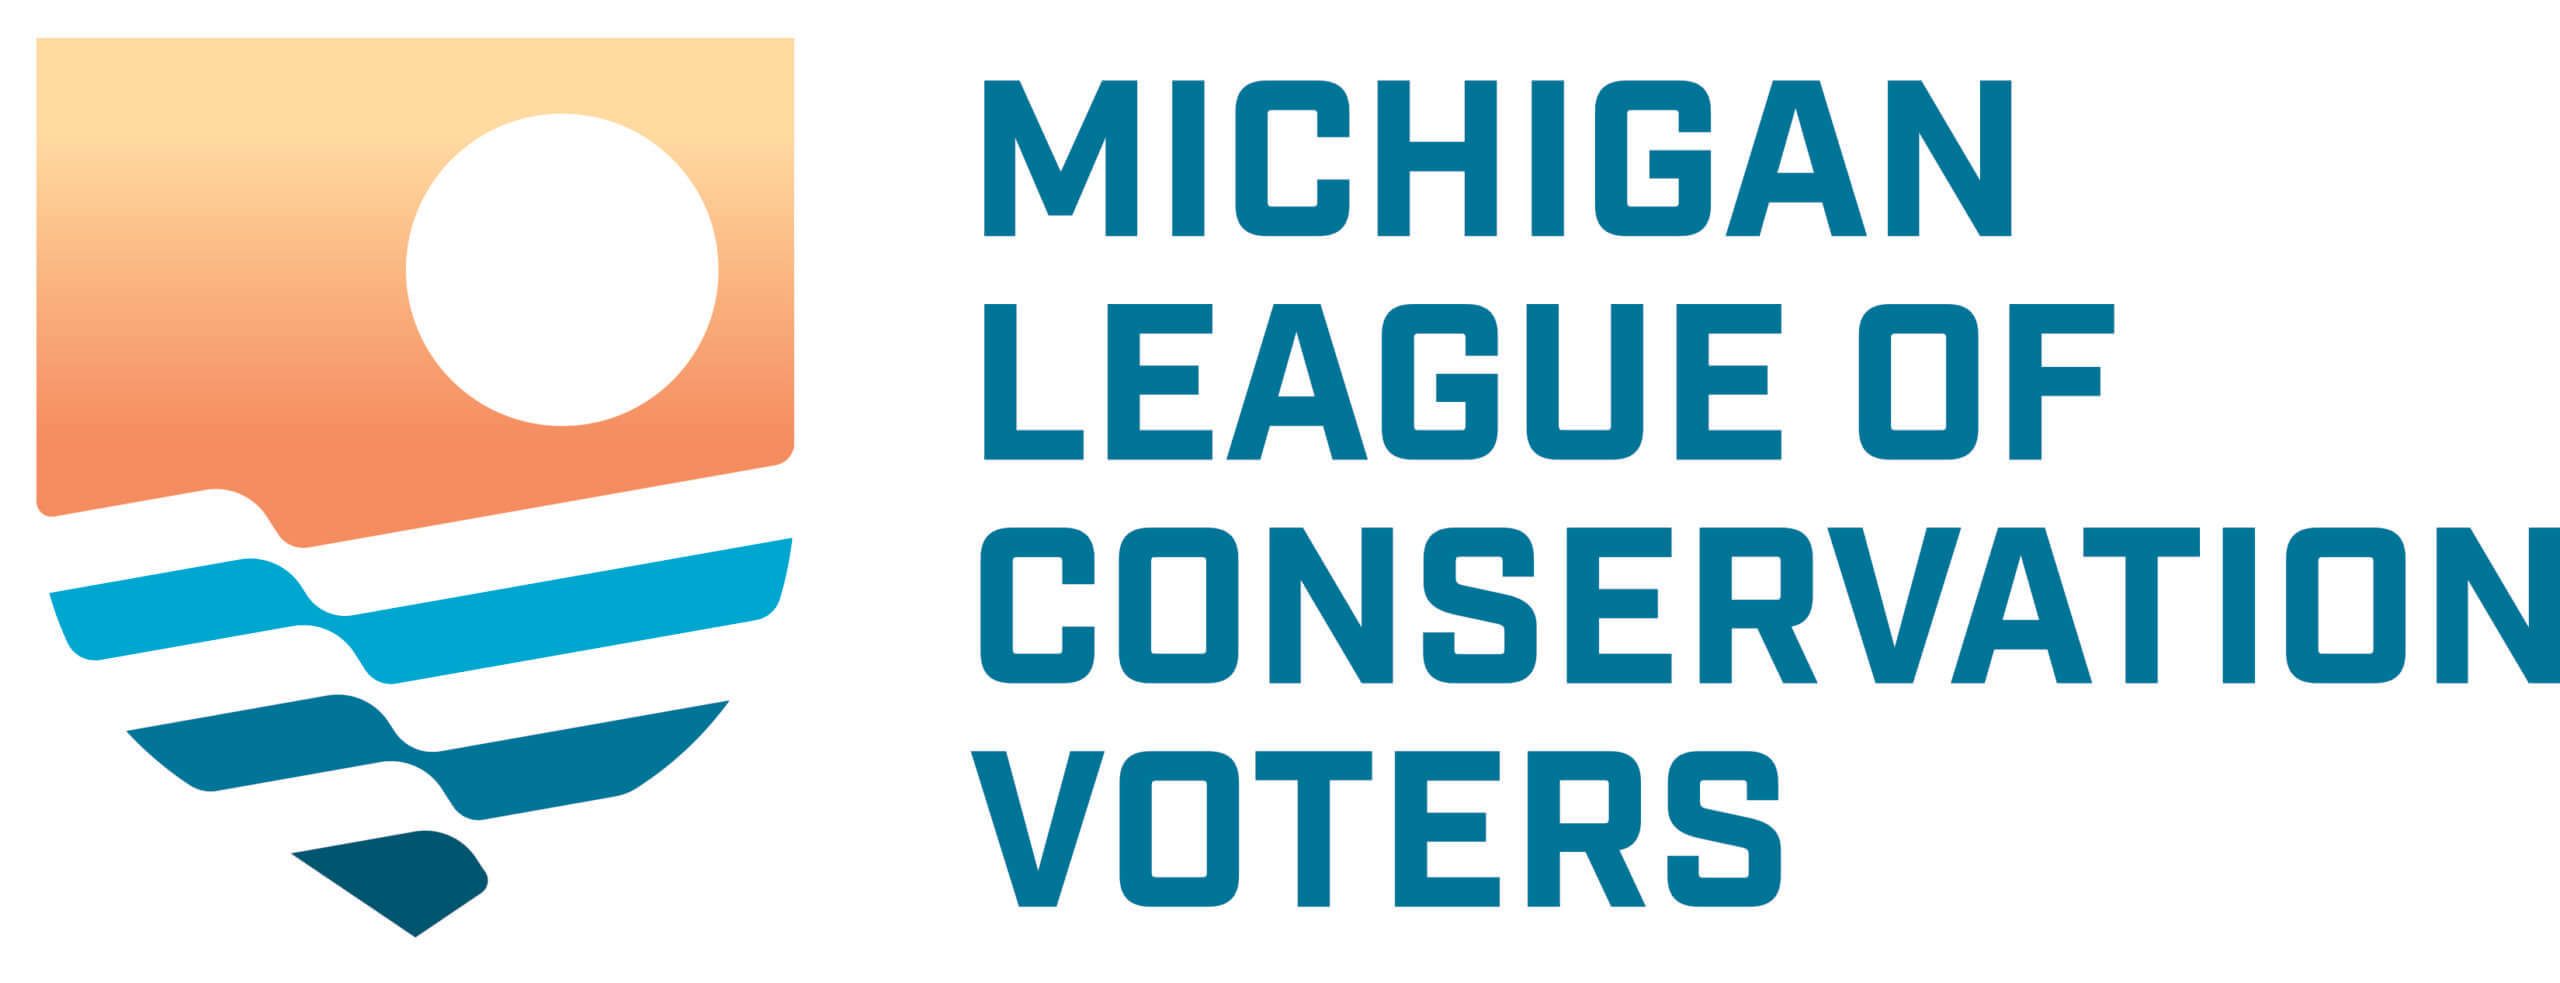 Michigan League of Conservation Voters Calls for Racial Justice in Light of Continued Police Violence